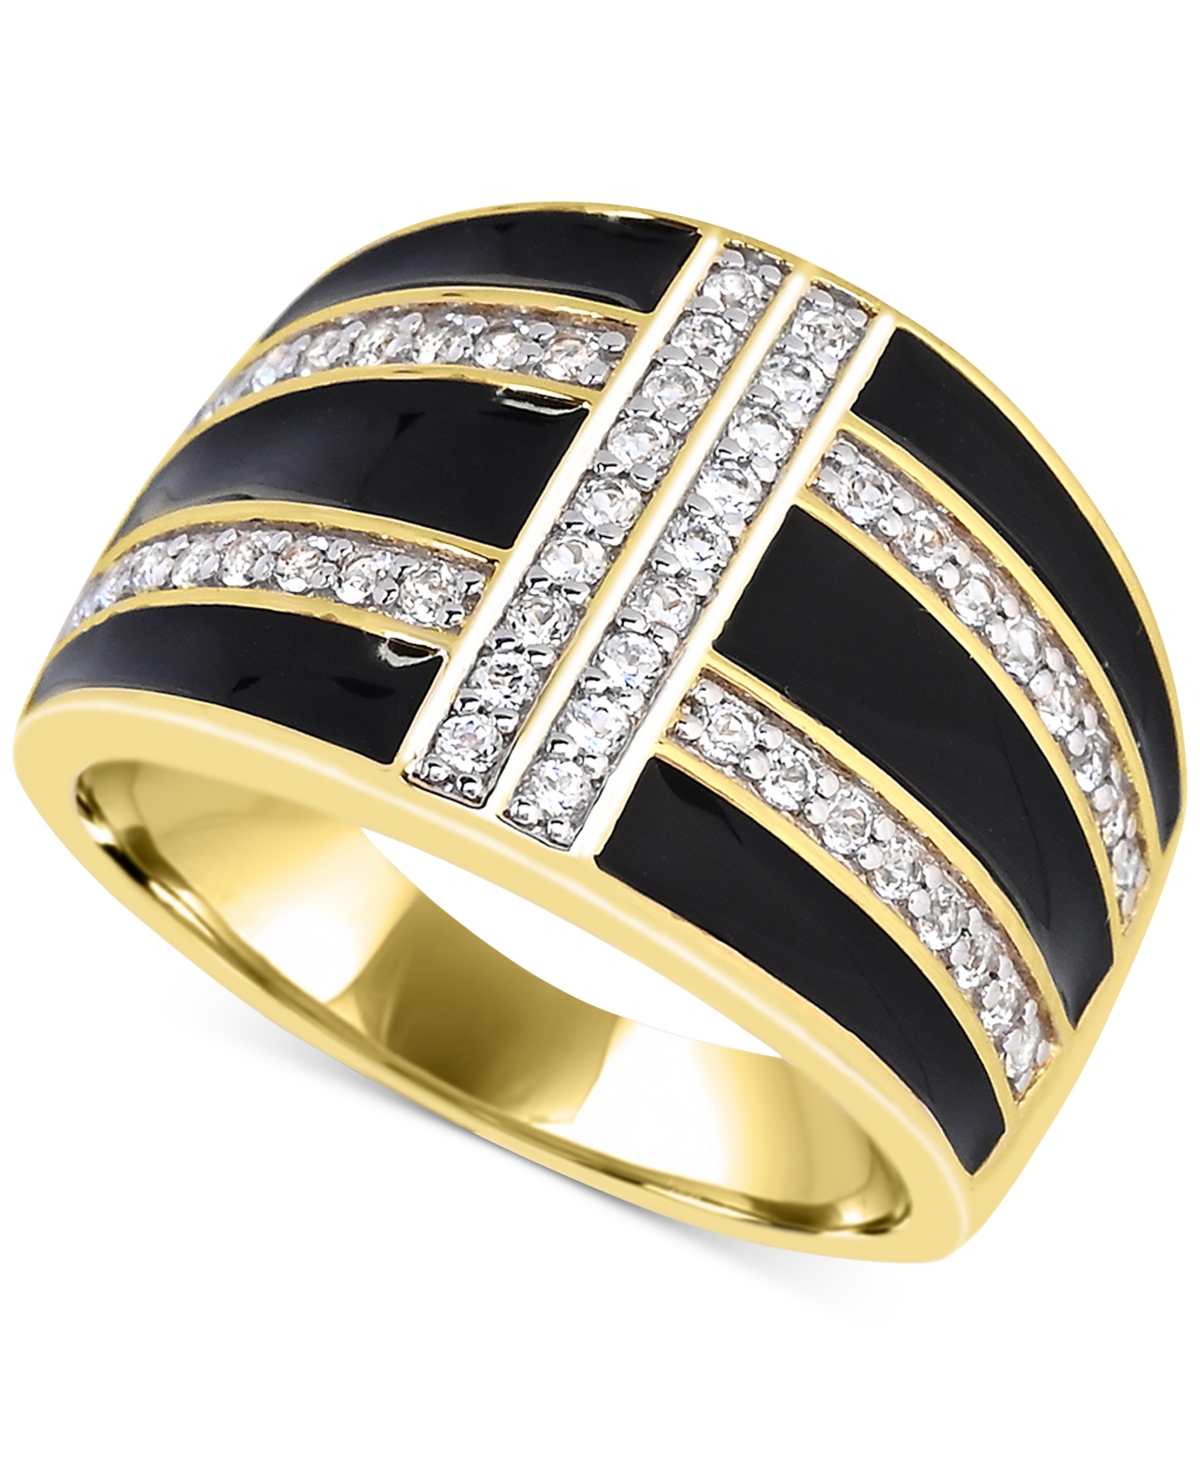 Women's 14K Gold Plated Ring in Sterling Silver - Black